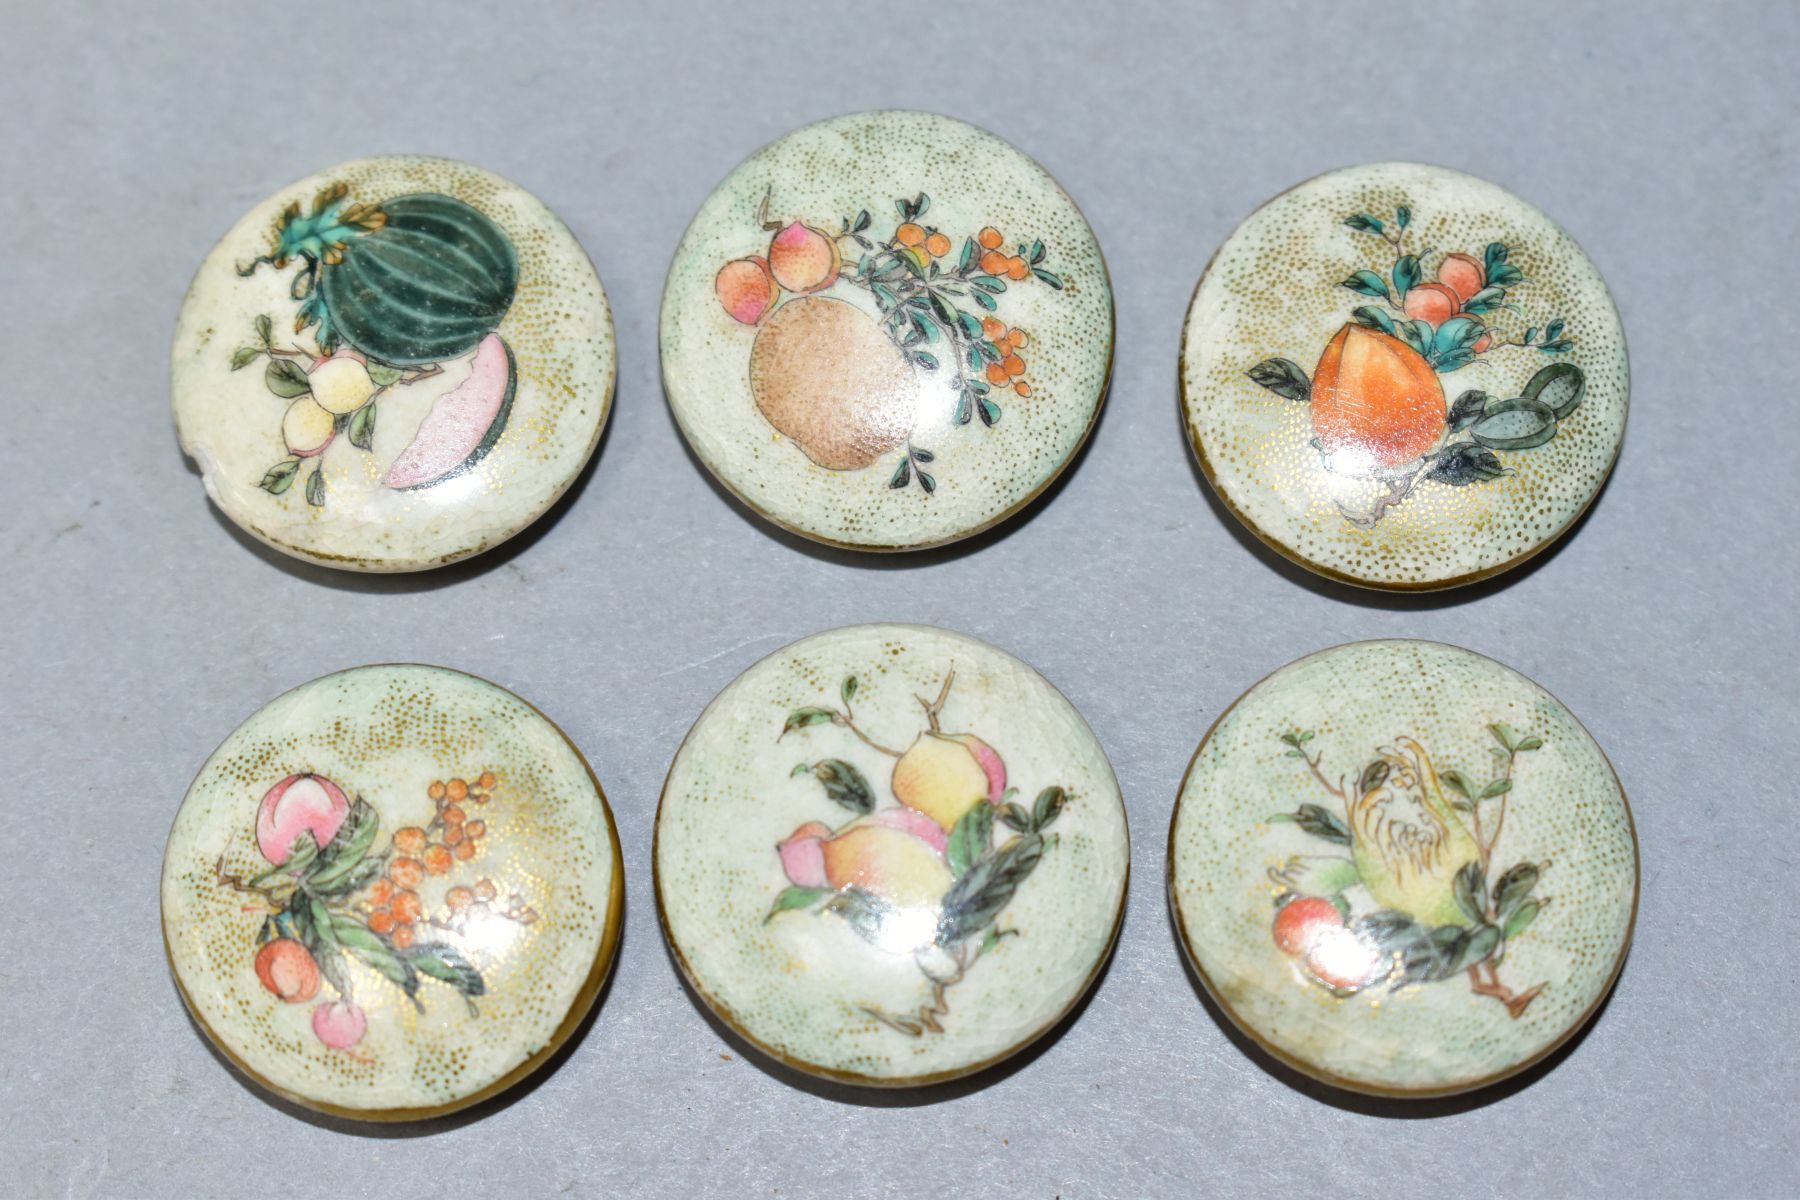 A SET OF SIX LATE 19TH/EARLY 20TH CENTURY JAPANESE SATSUMA POTTERY BUTTONS, painted with fruits